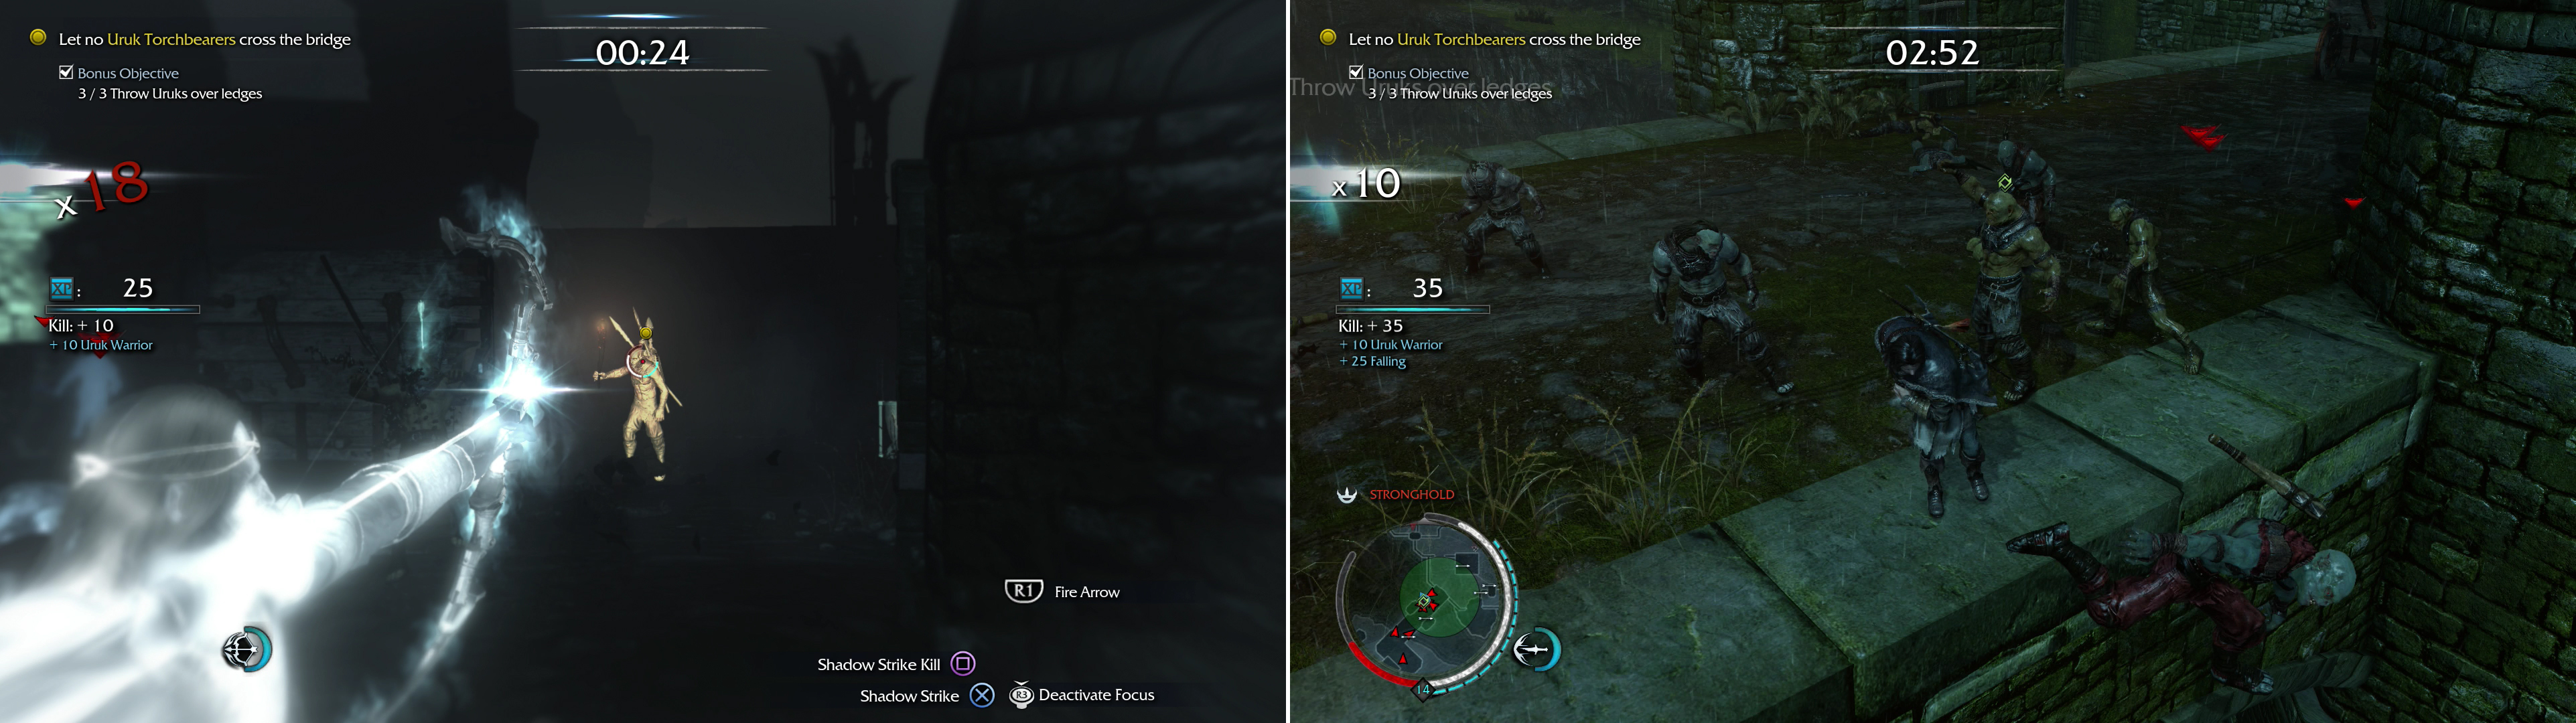 The easiest way to stop Torchbearers is to shoot them in the head (left). Chuck some Uruks off the bridge to complete a bonus objective (right).